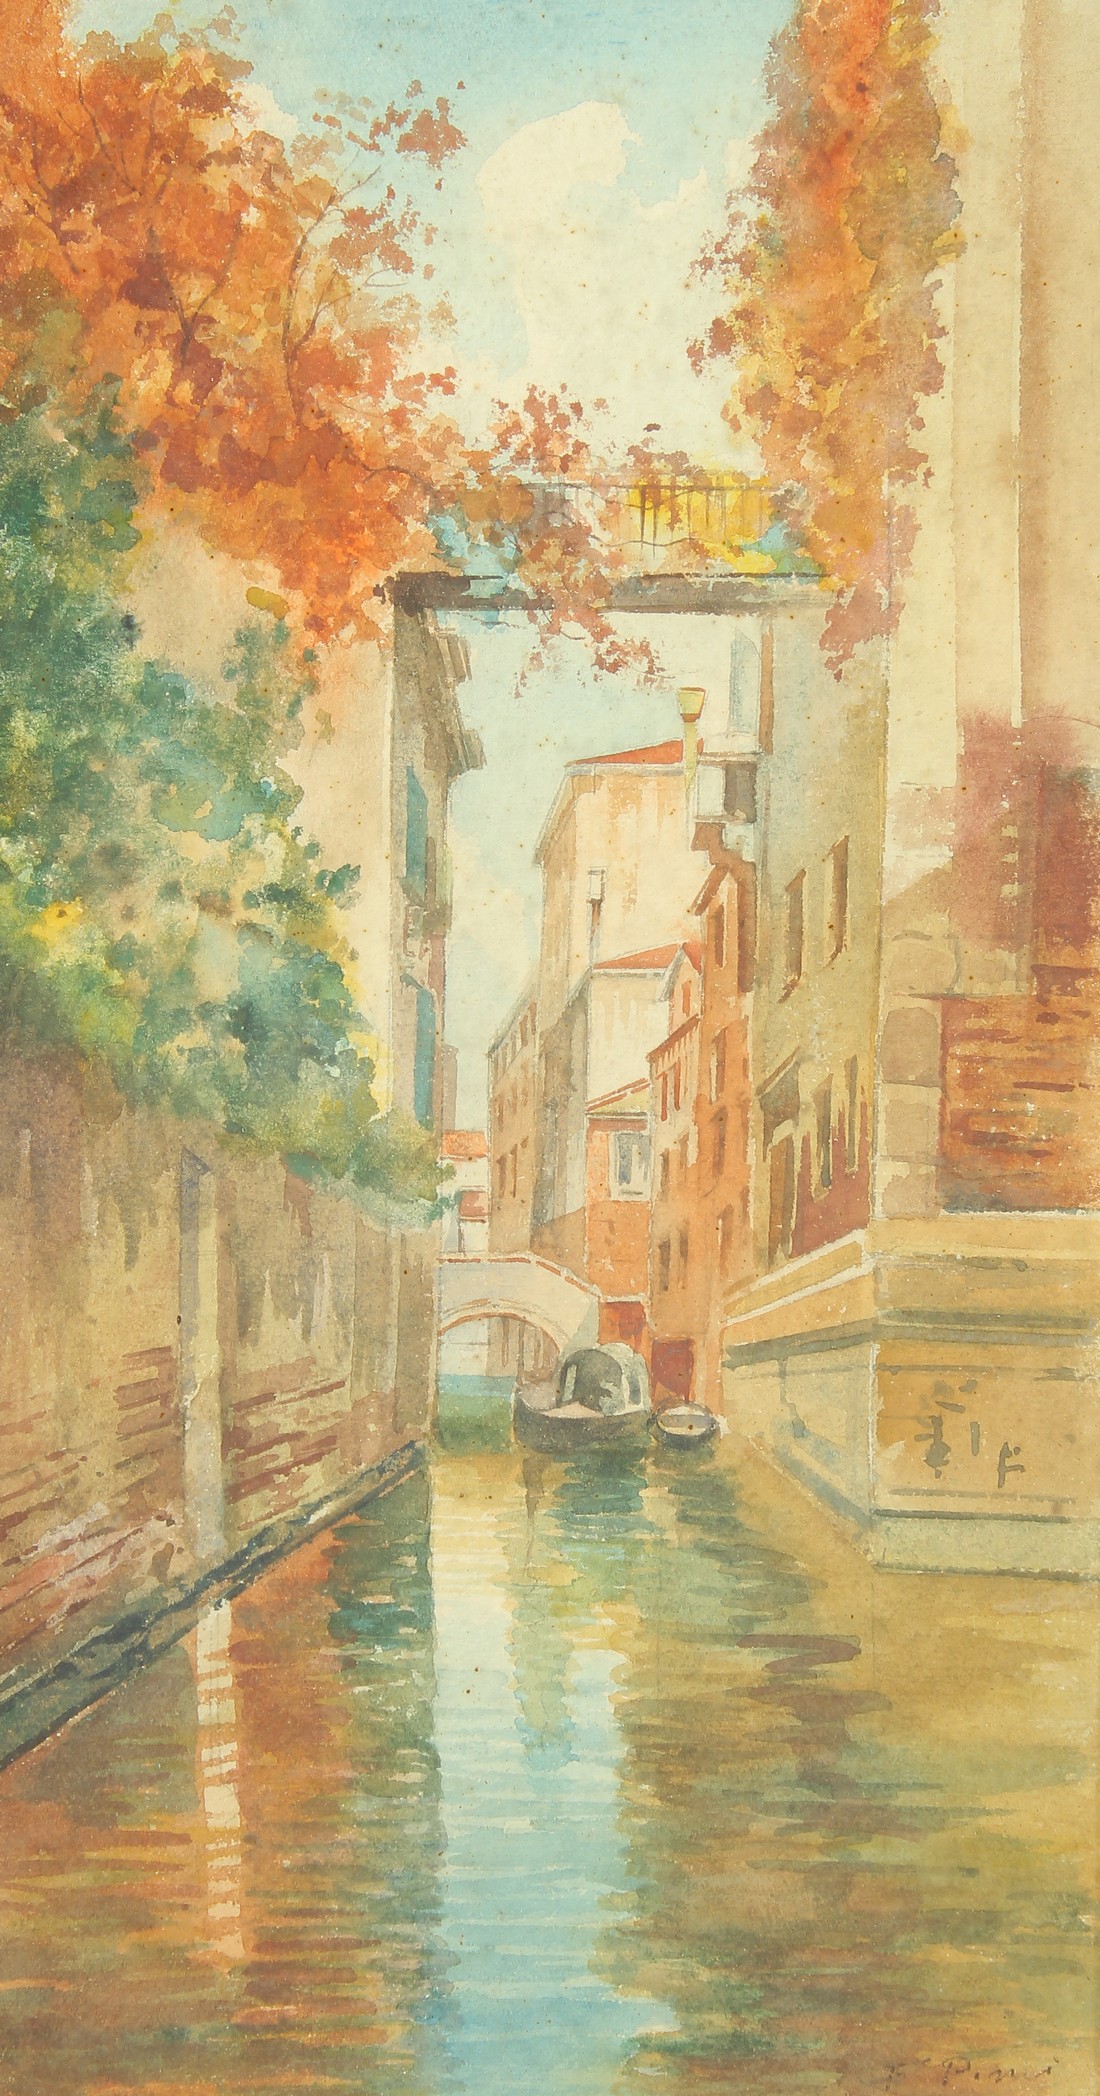 A Venetian canal scene, watercolour, indistinctly signed, 14" x 7.5", (35.5x19cm). - Image 2 of 3